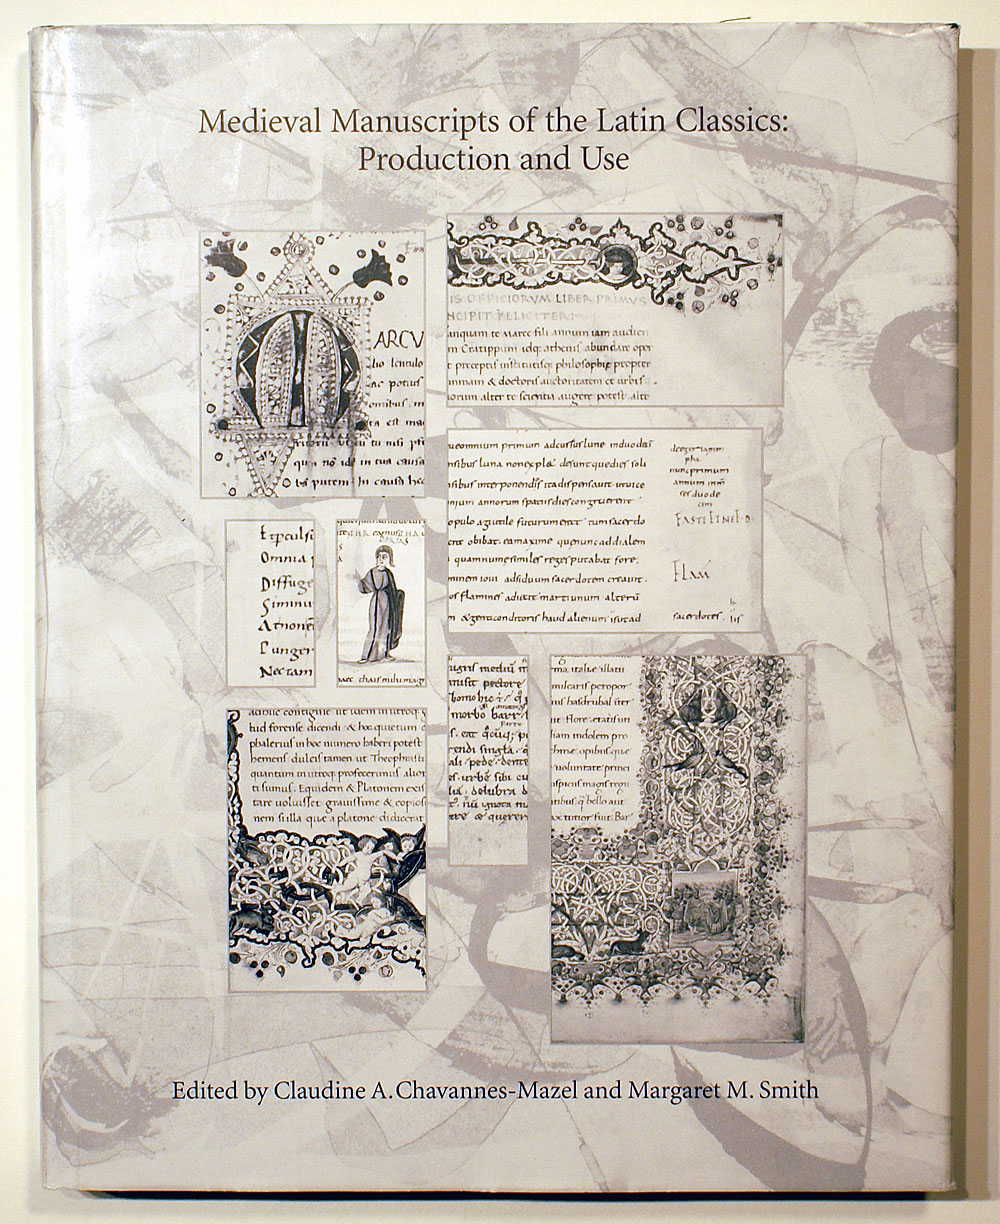 MEDIEVAL MANUSCRIPTS OF THE LATIN CLASSICS PRODUCTION & USE